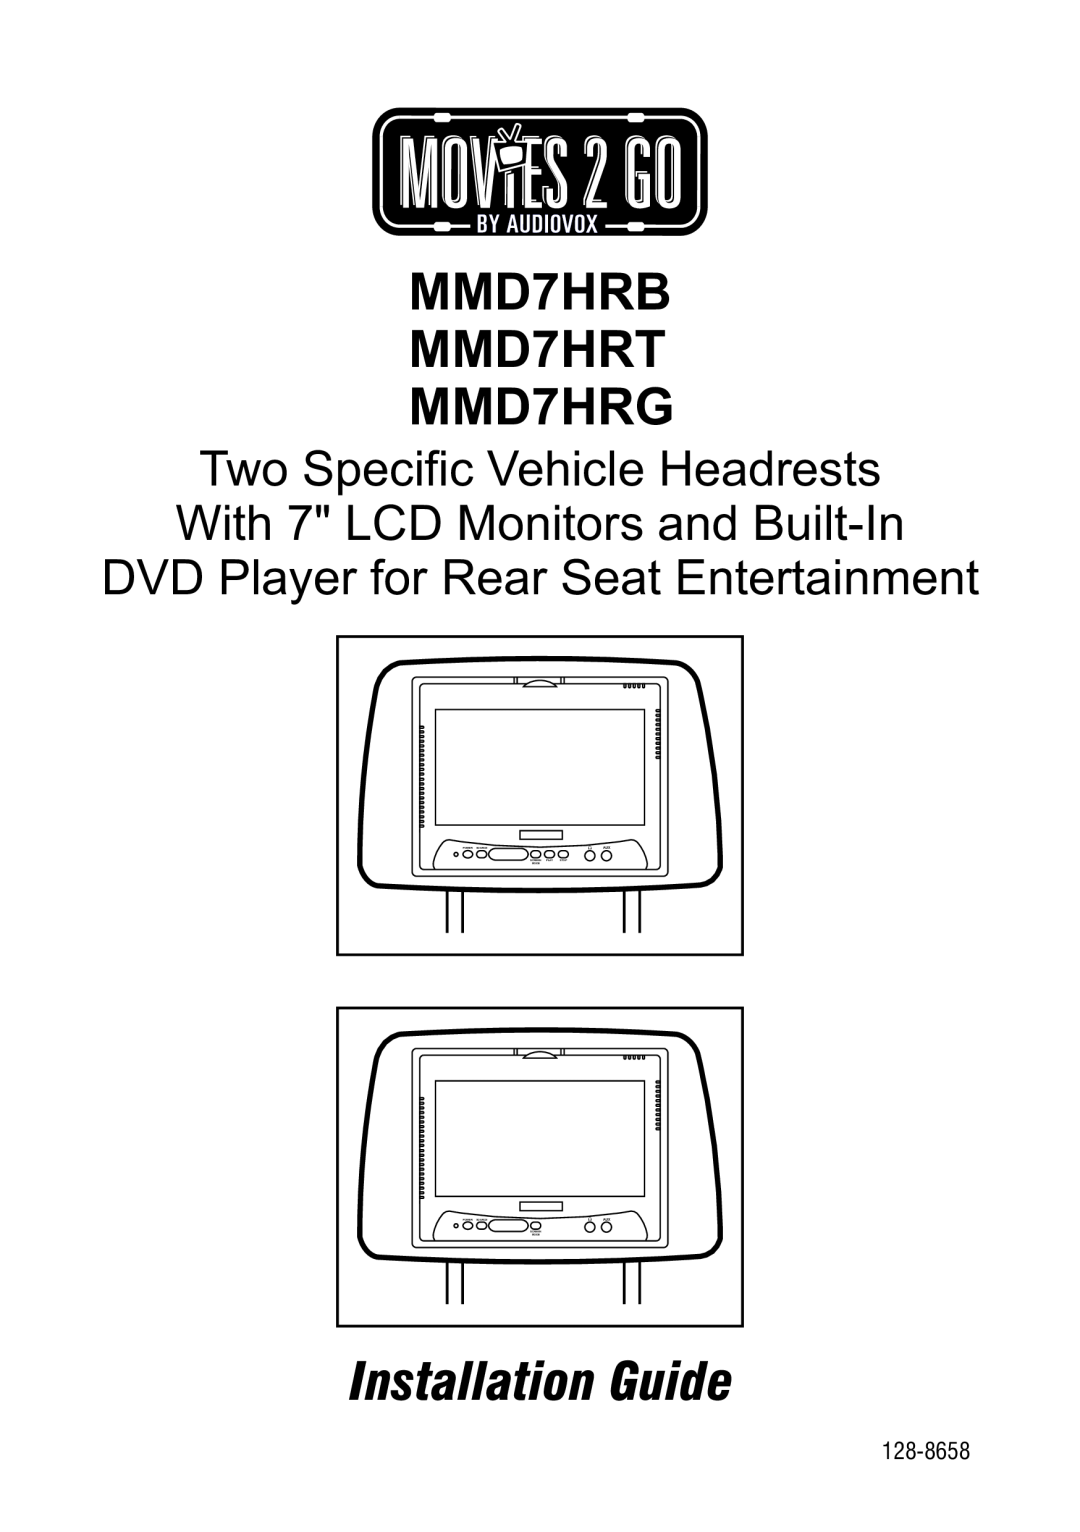 Audiovox manual MMD7HRB MMD7HRT MMD7HRG, Installation Guide, DVD Player for Rear Seat Entertainment, Power Source 